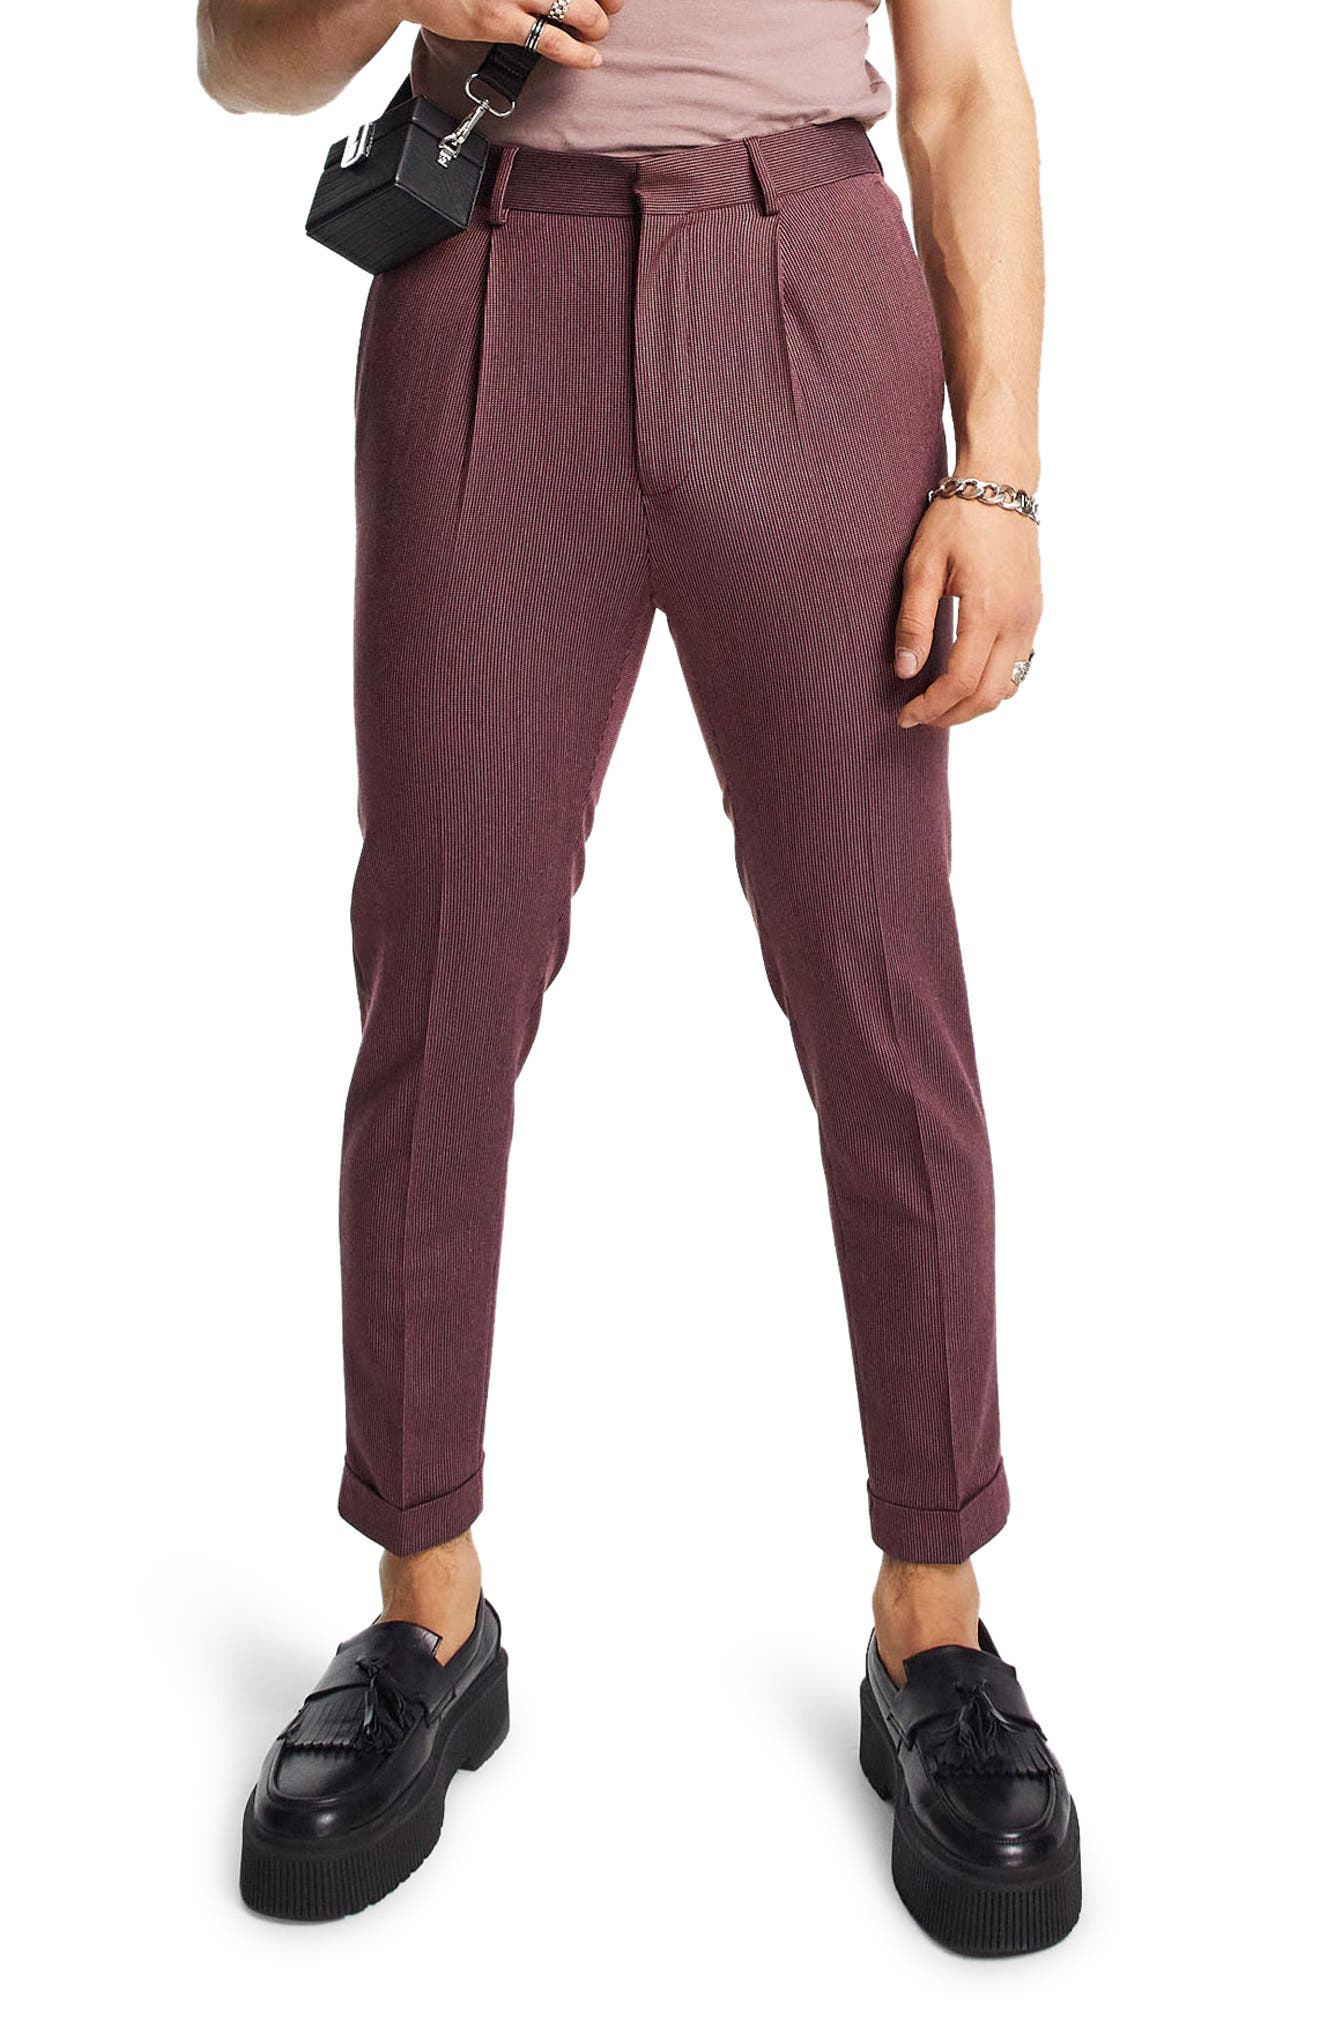 ASOS DESIGN Cropped Tapered Fit Pants in Burgundy